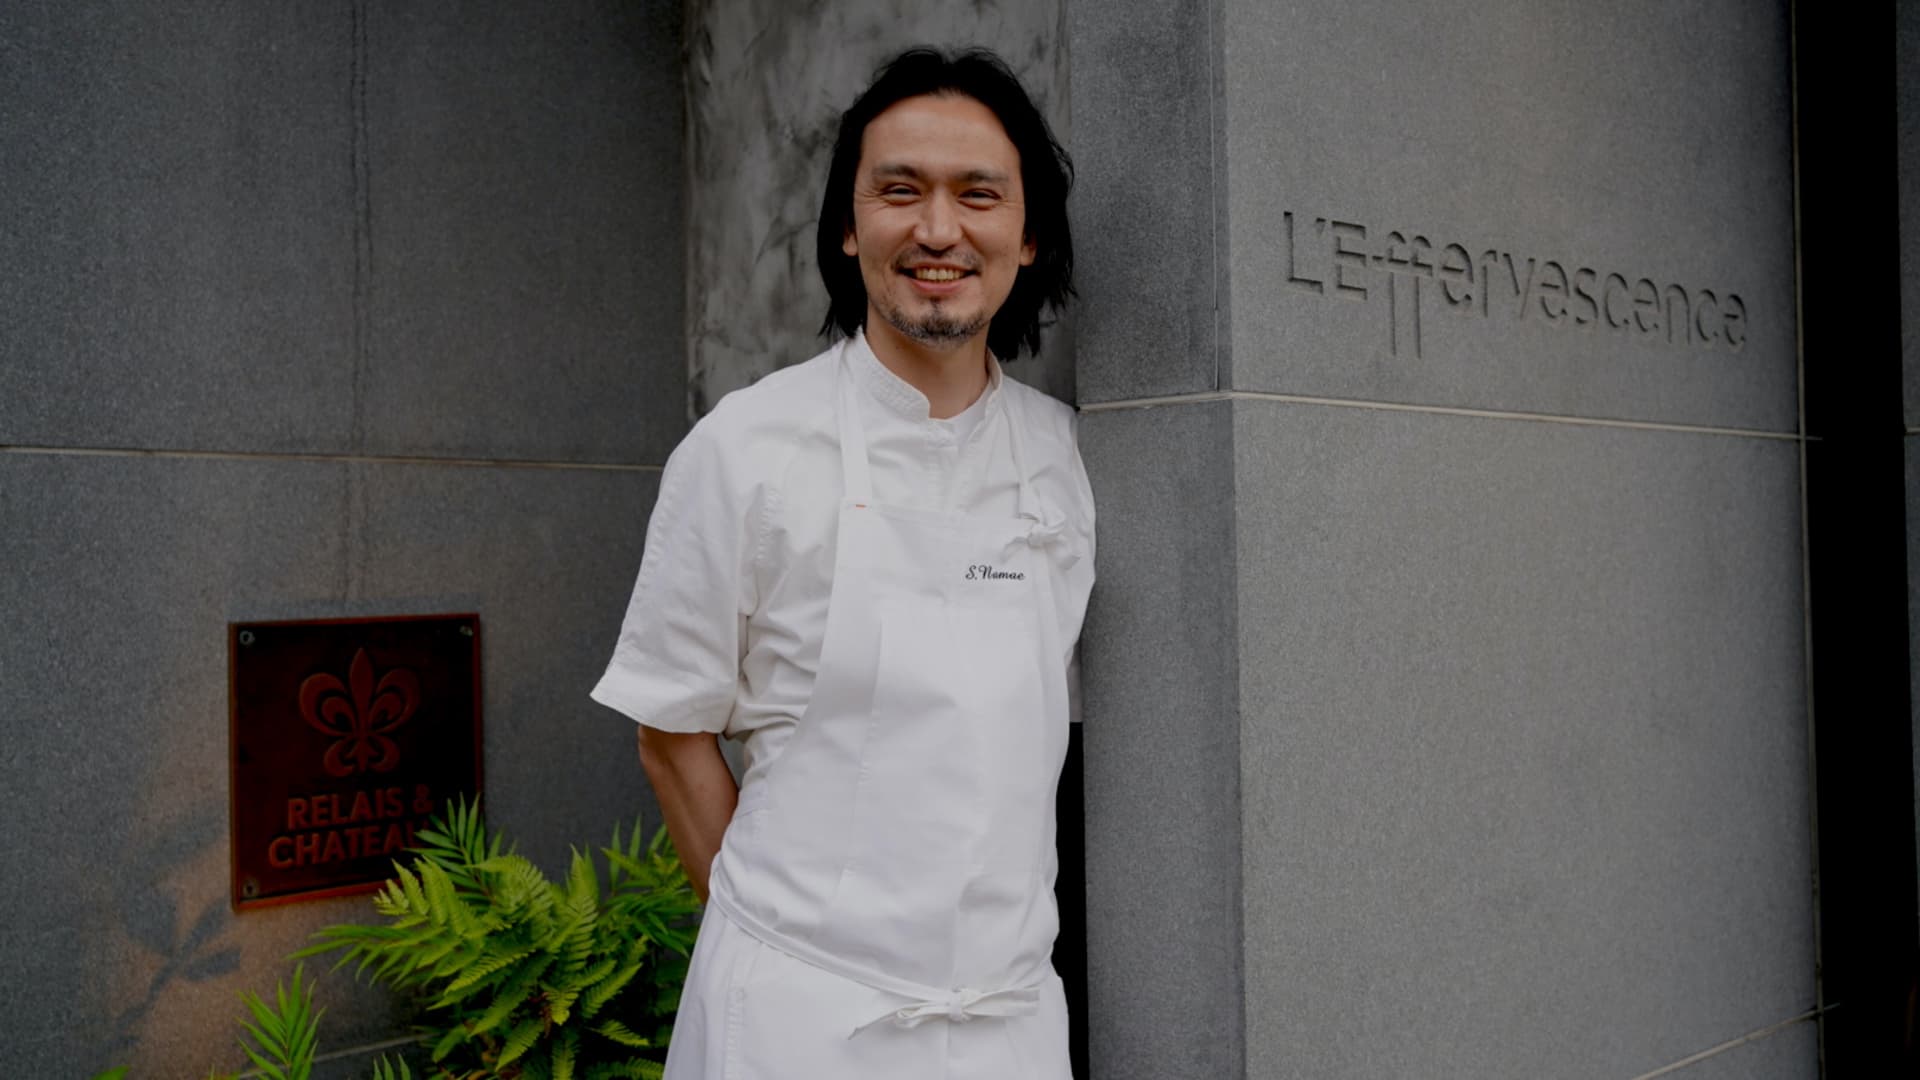 Michelin-starred chef behind one of Asia’s 50 best restaurants shares philosophy